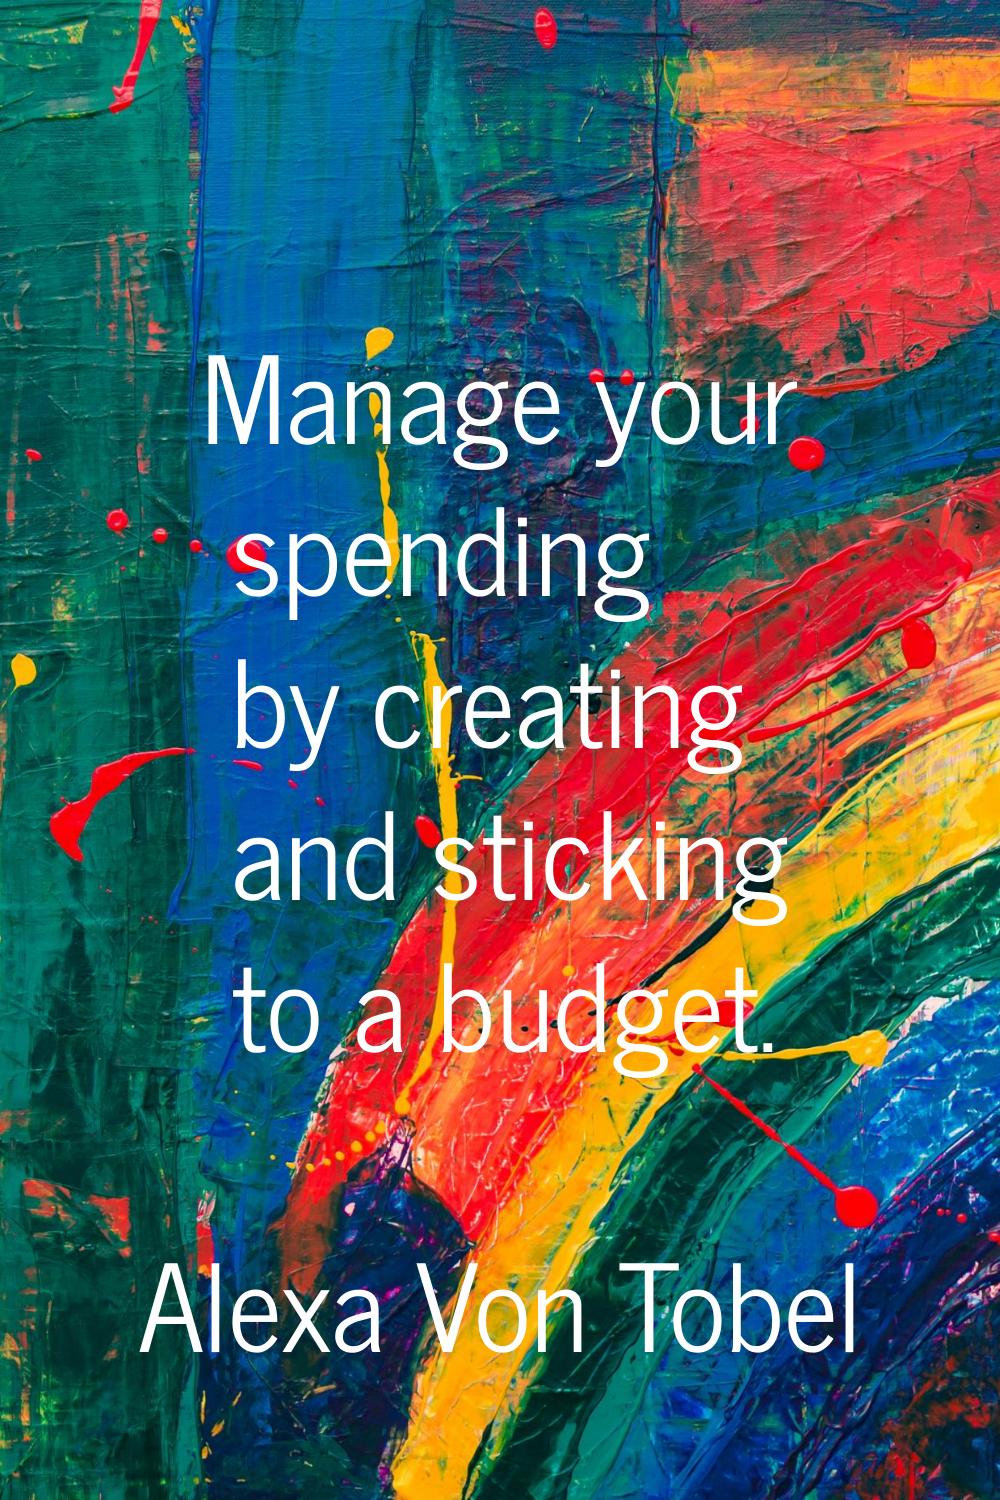 Manage your spending by creating and sticking to a budget.